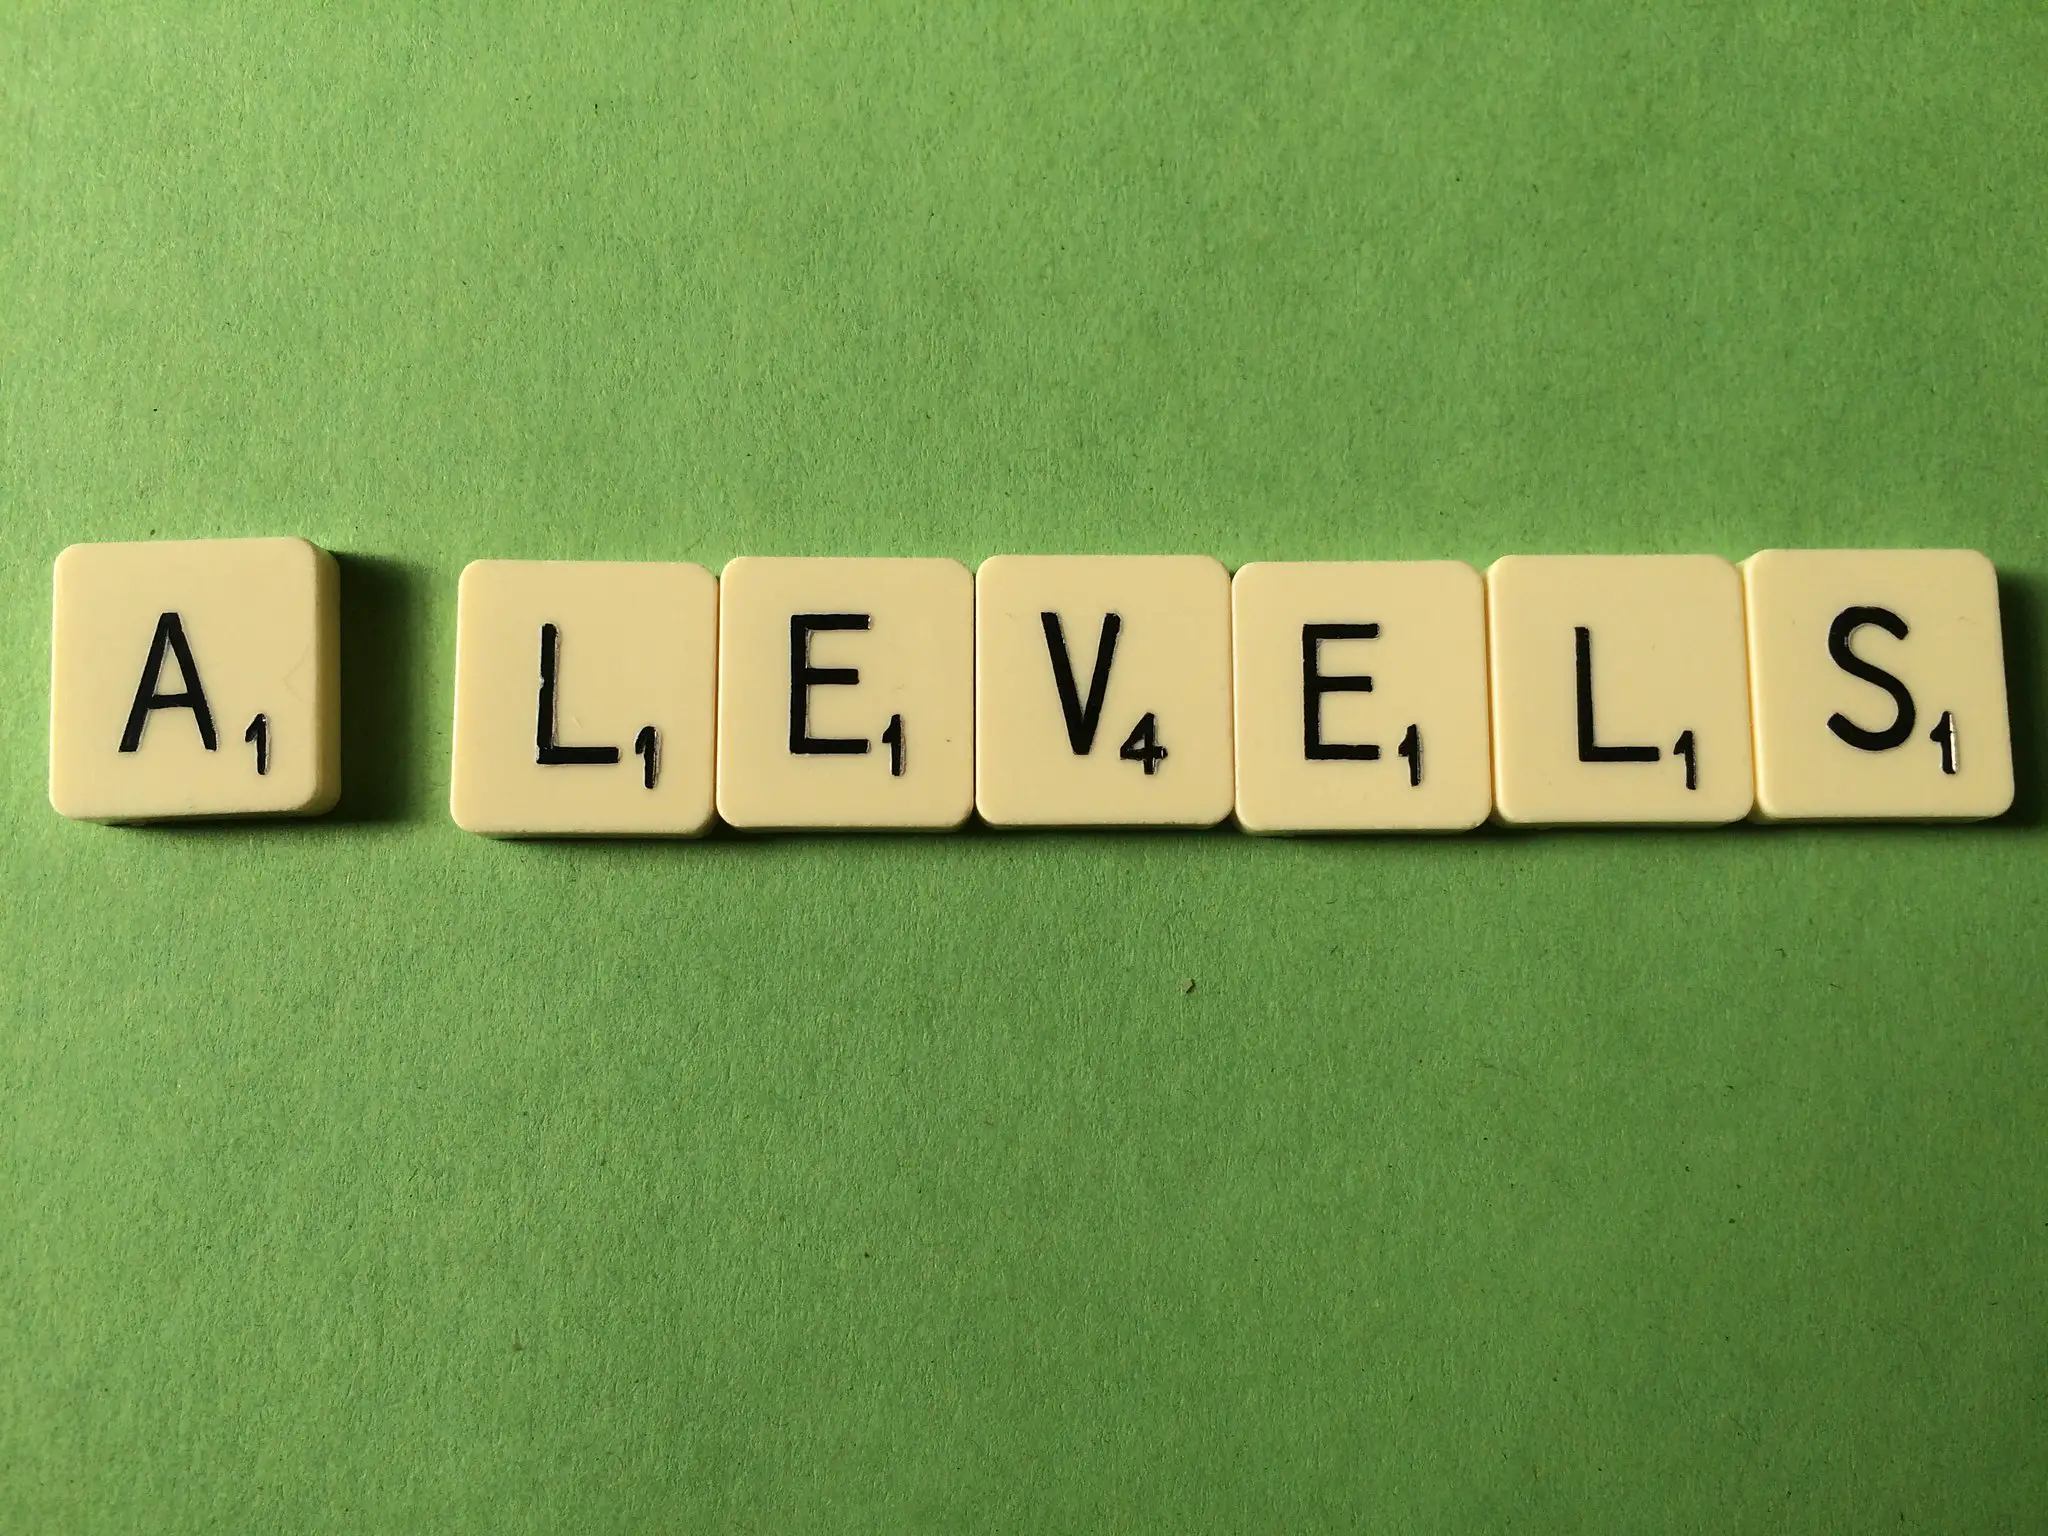 a-level result in scrabble letters